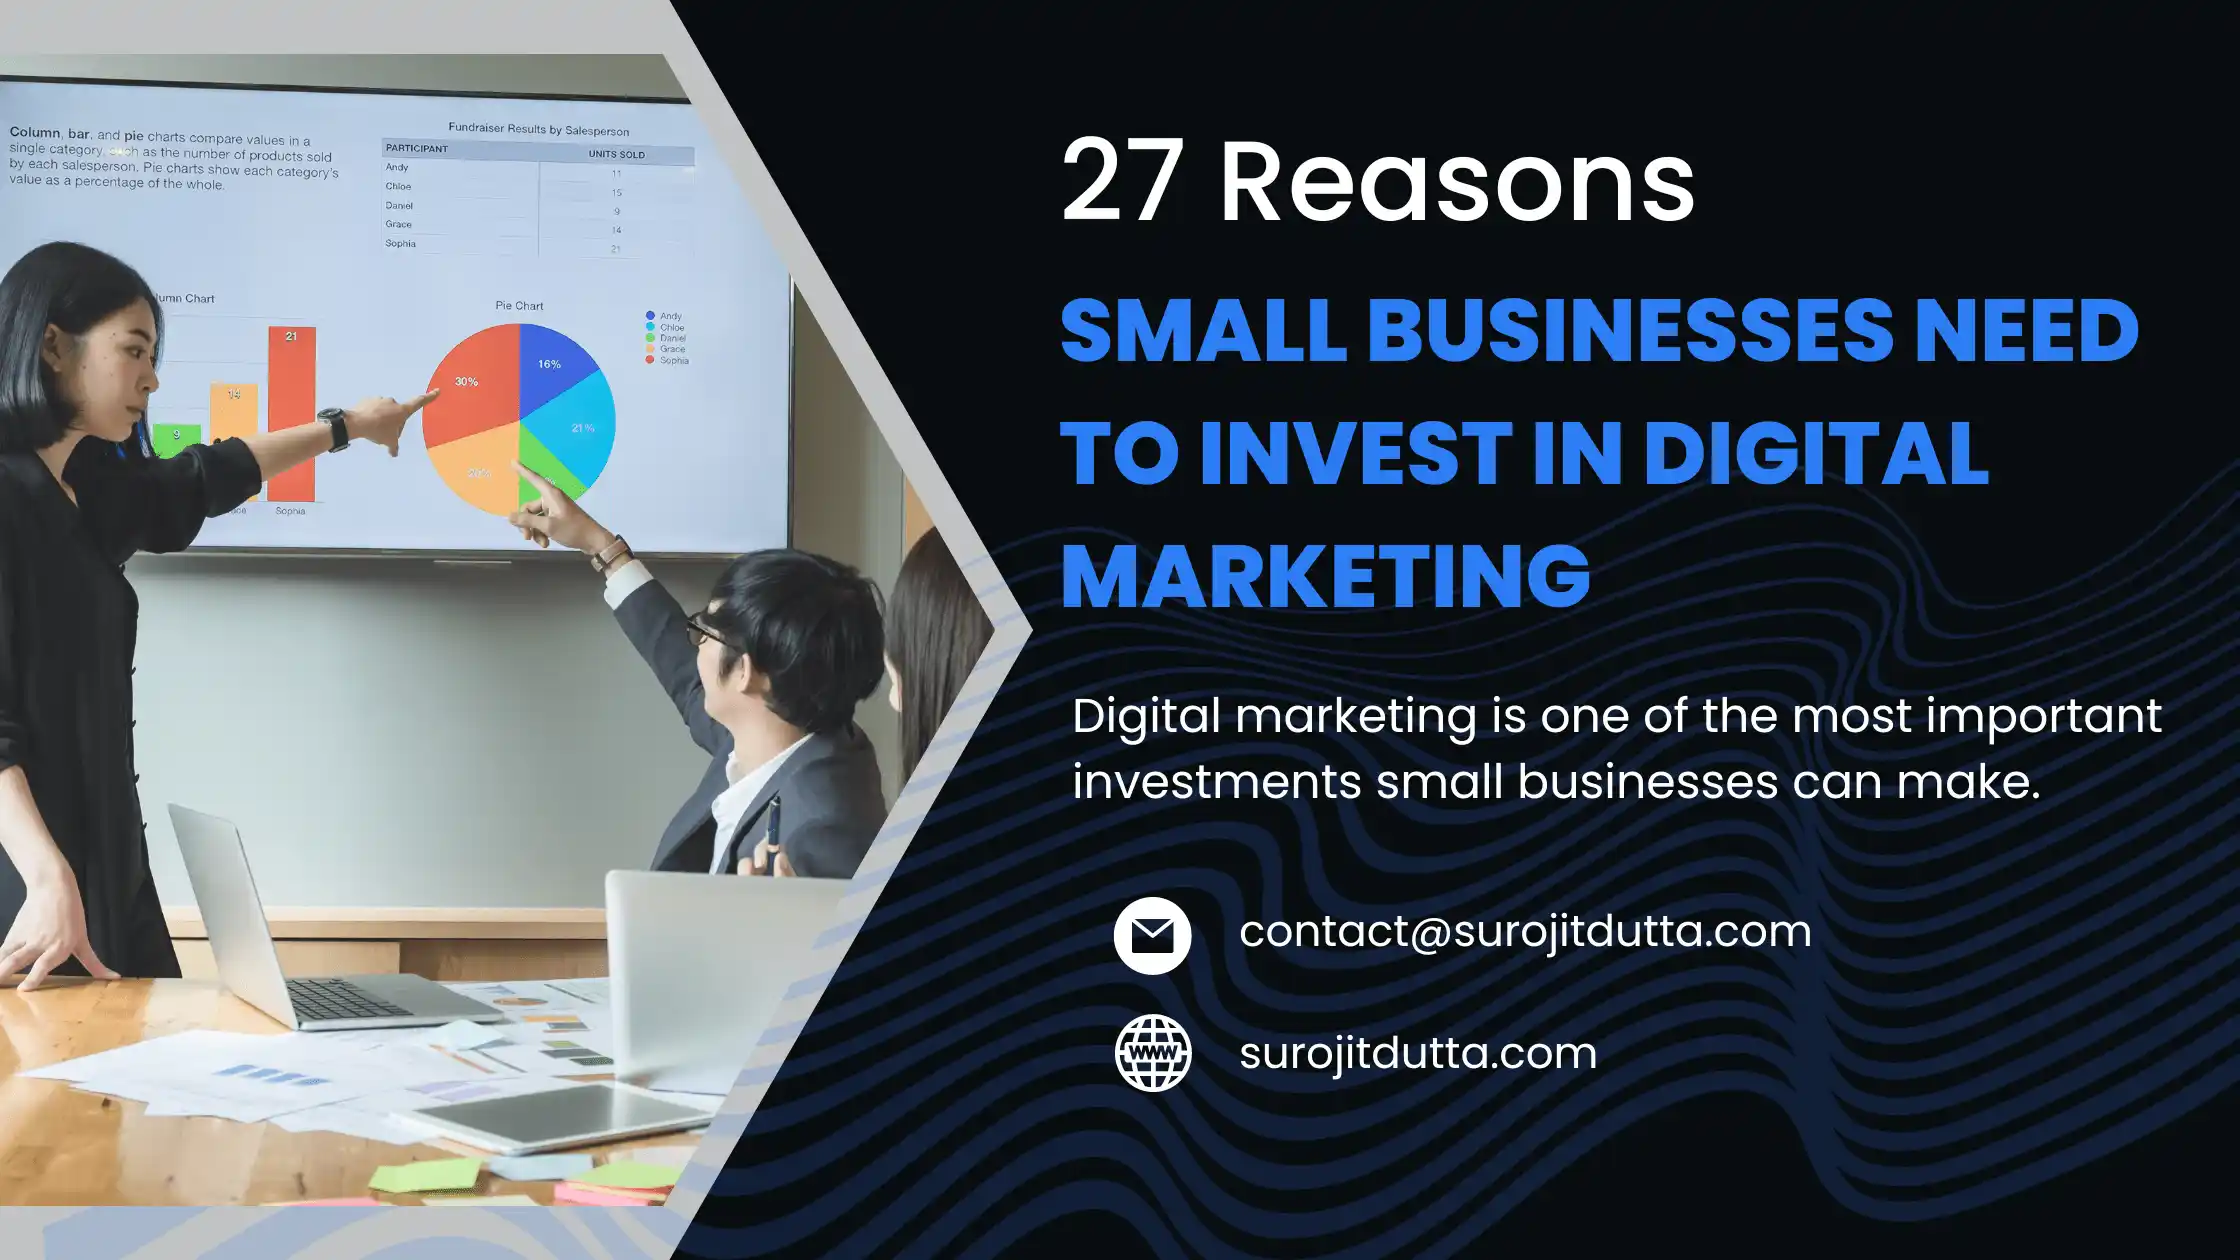 Reasons Small Businesses Need to Invest in Digital Marketing